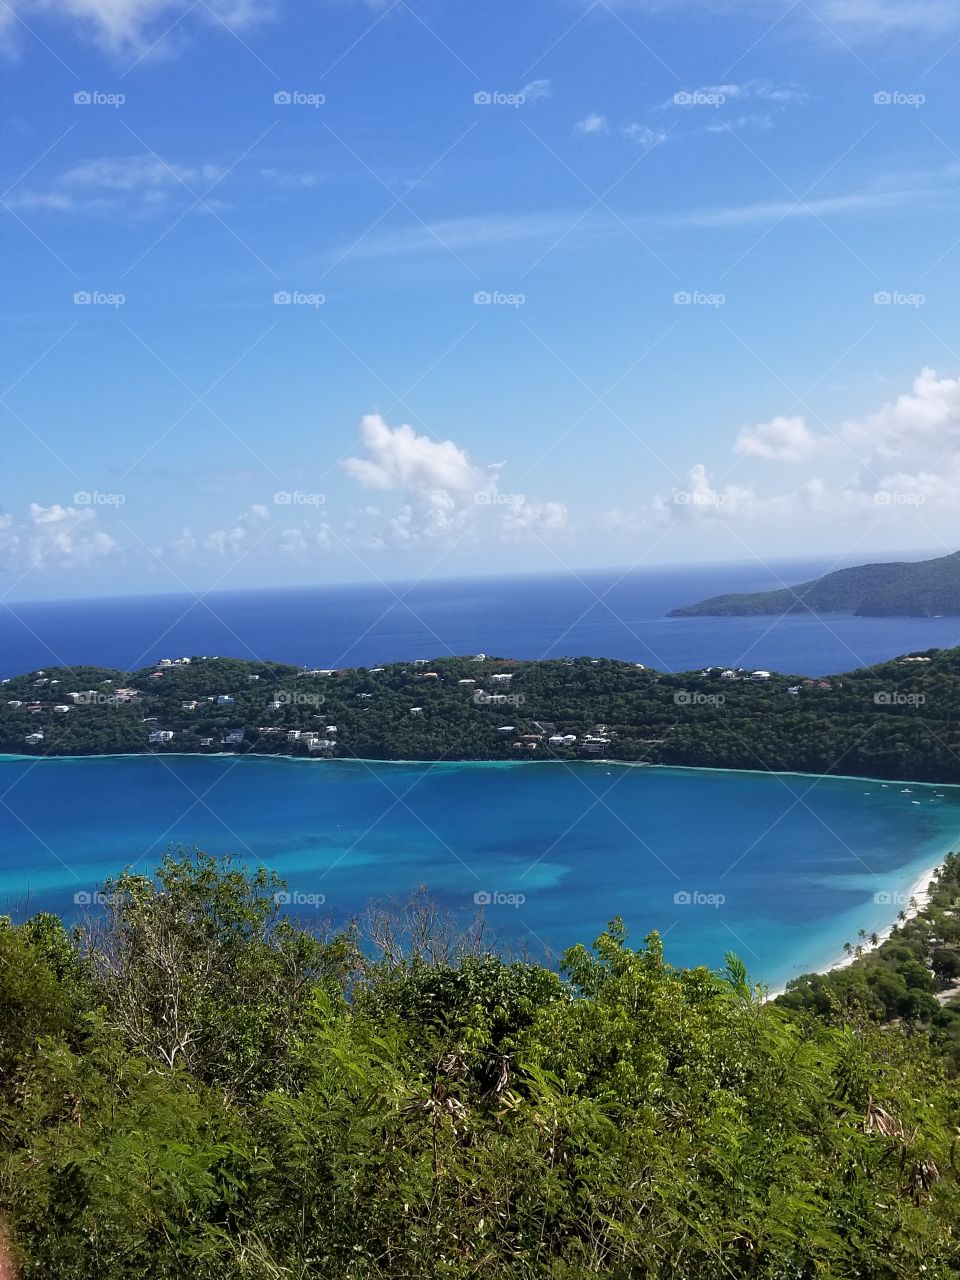 At the top of St Thomas island